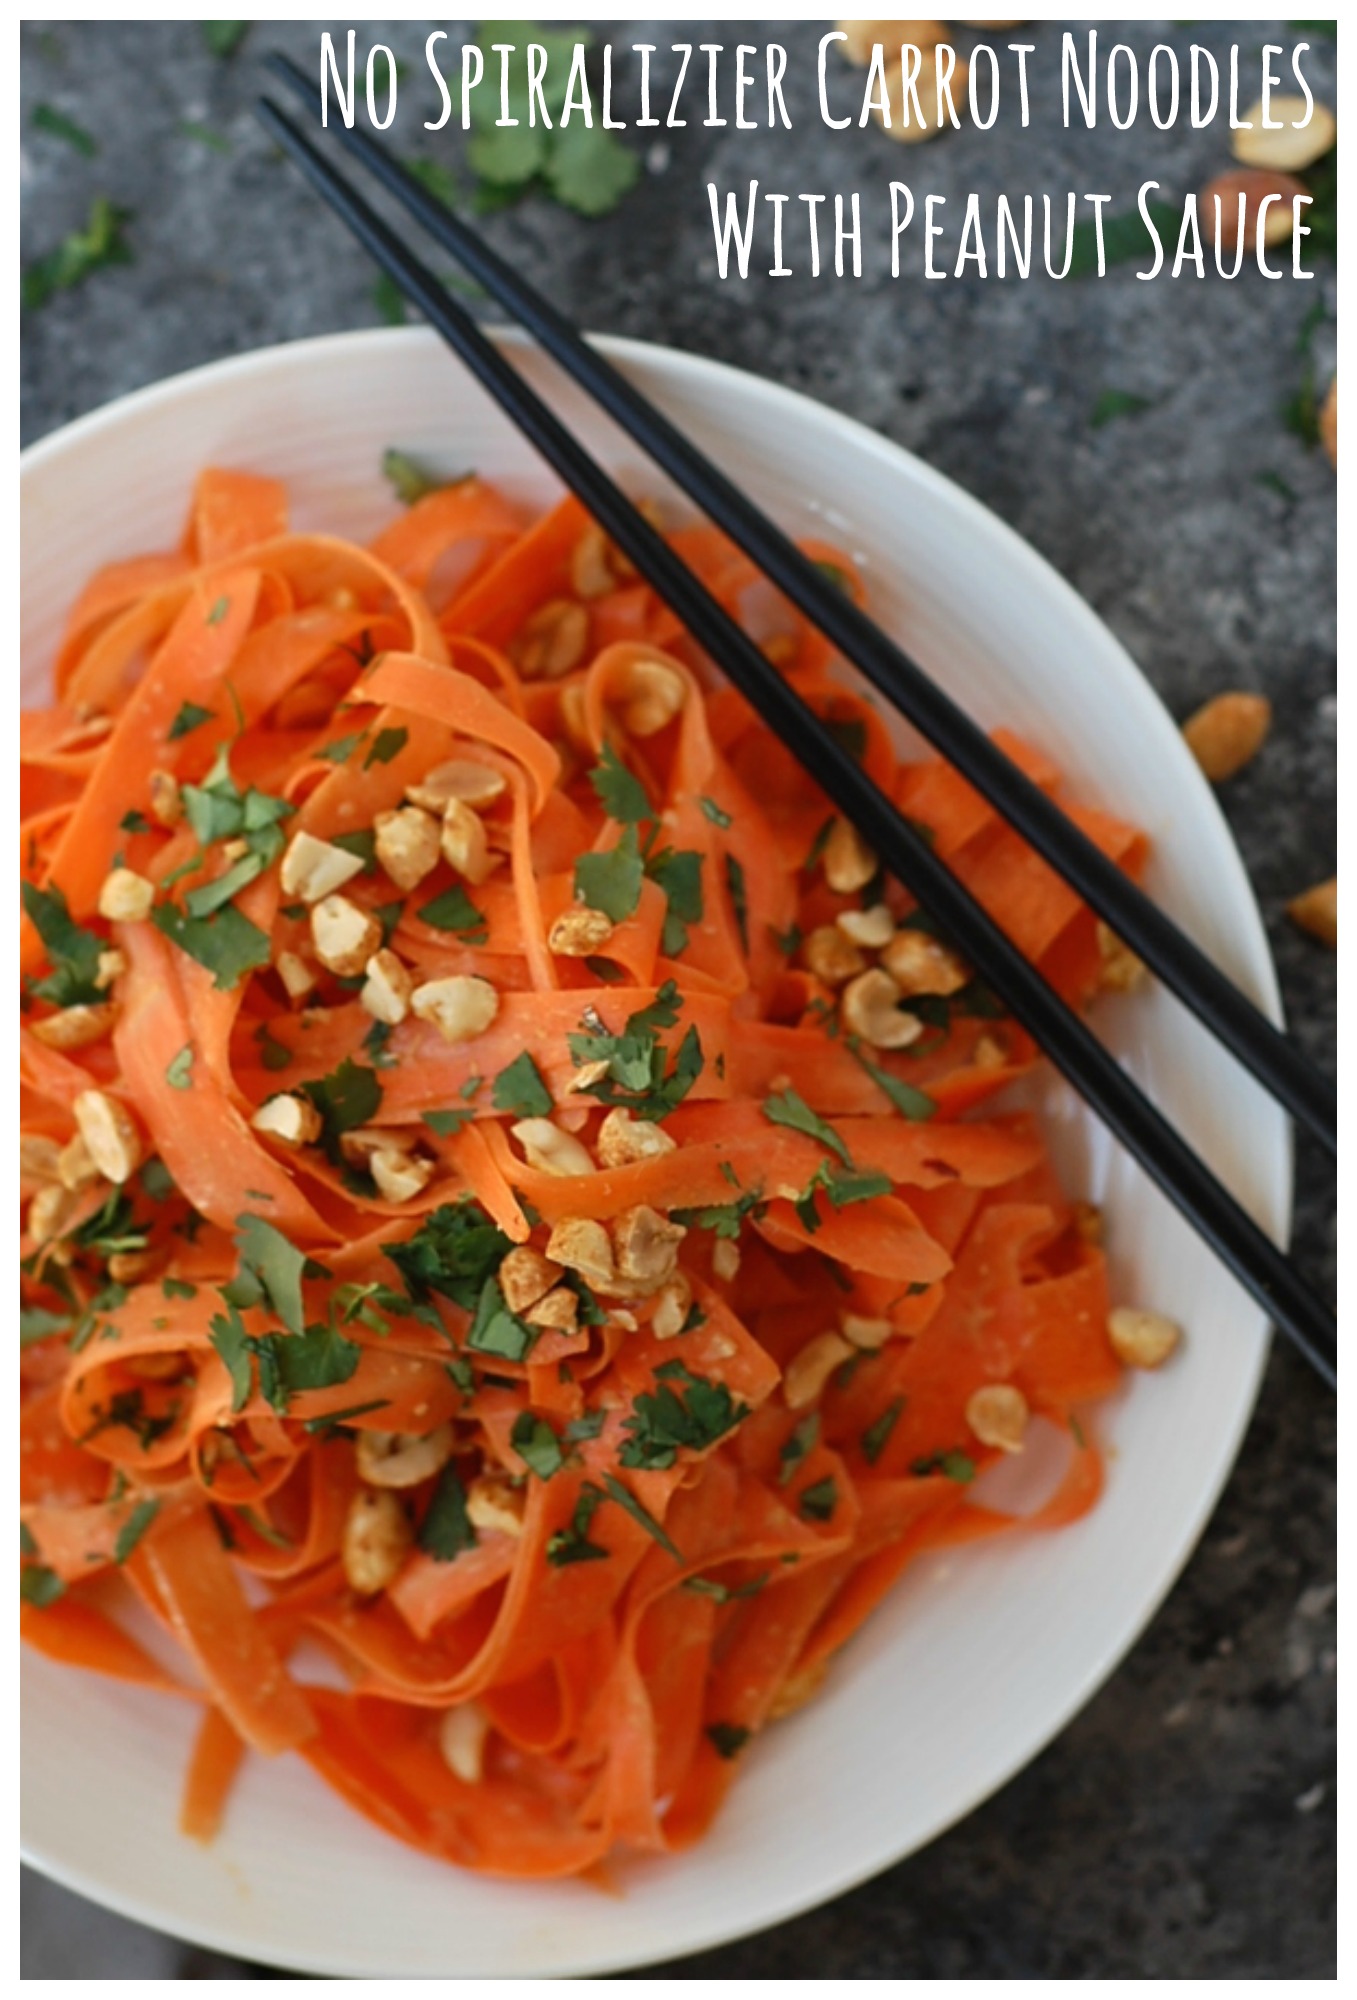 Raw carrot noodles topped with an easy, spicy peanut sauce. Vegan, gluten-free, and no spiralizer required!